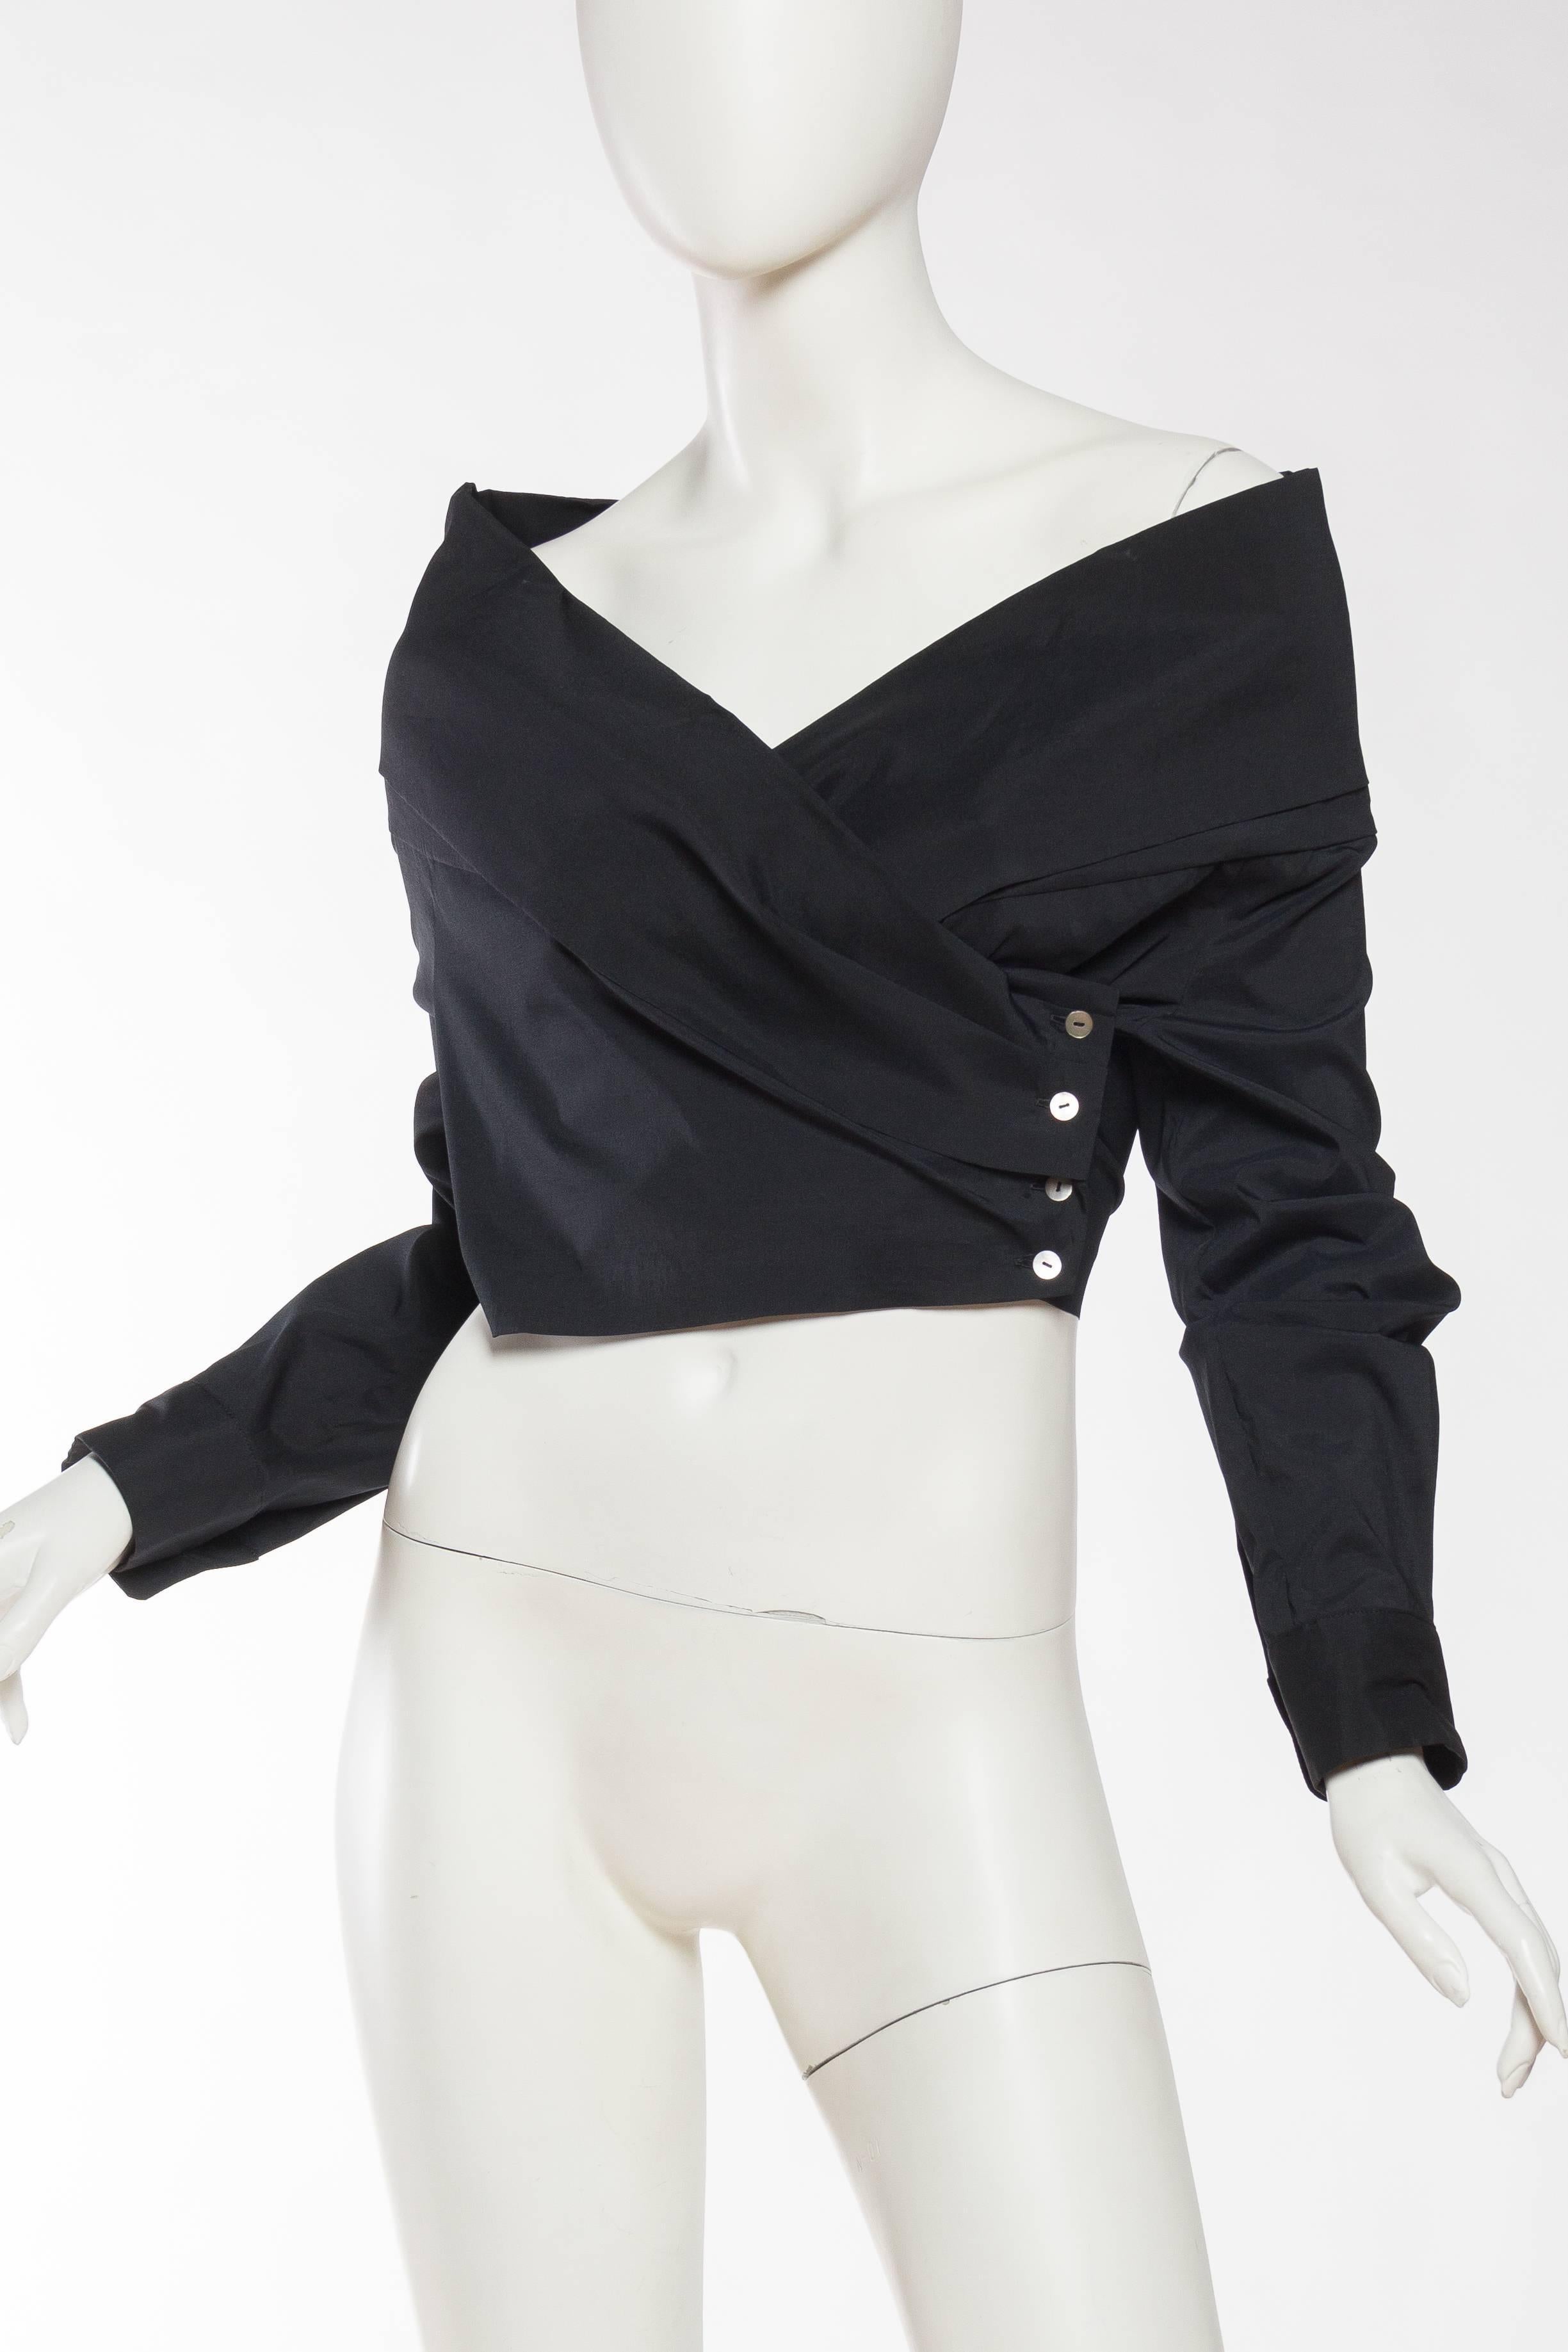 Iconic yet terribly hard to find 1990s off the shoulder picture blouse, stretch cotton wraps and buttons on the side. 